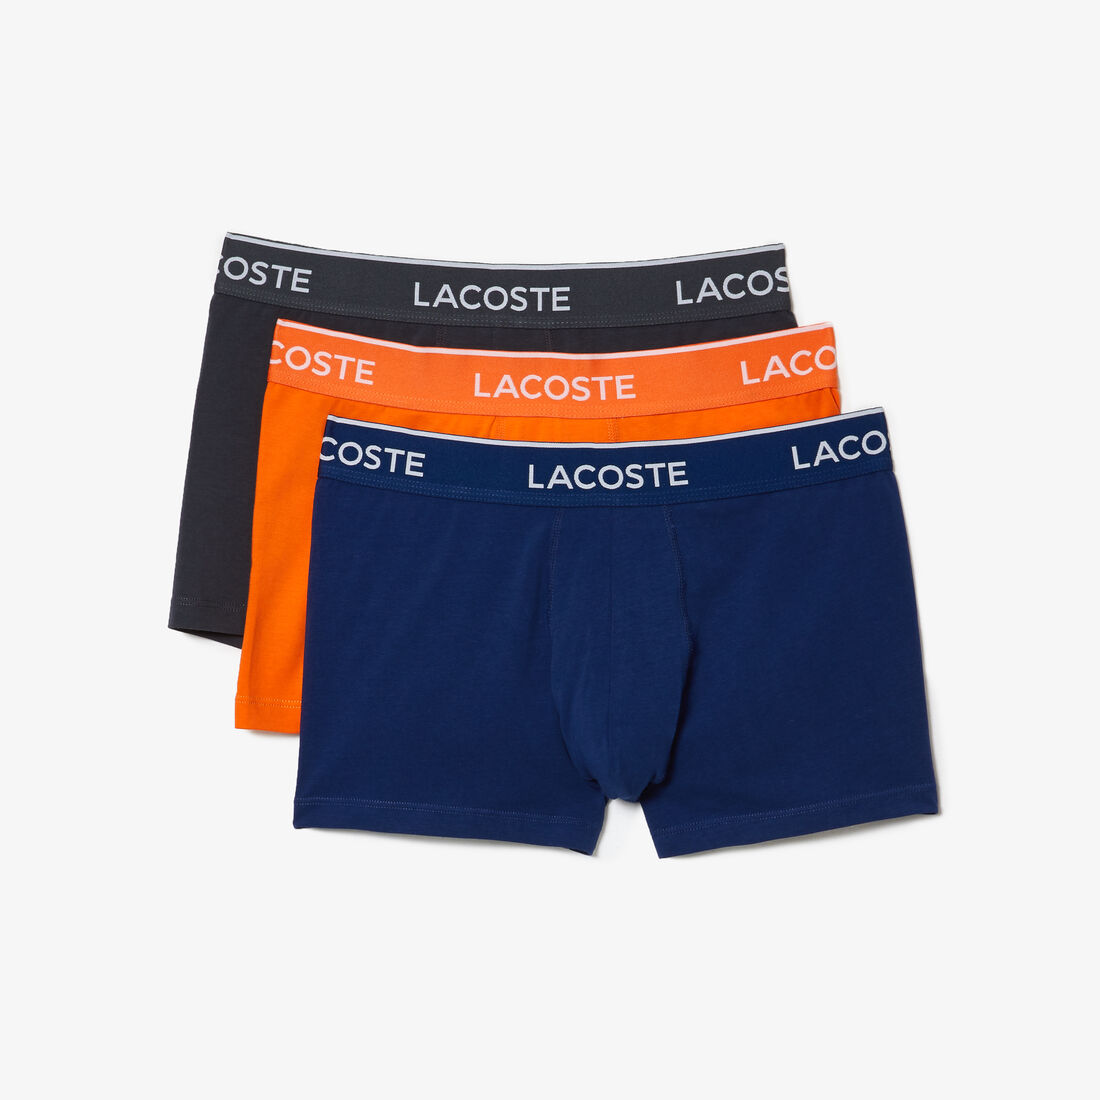 Men’s Lacoste Trunk Three-Pack